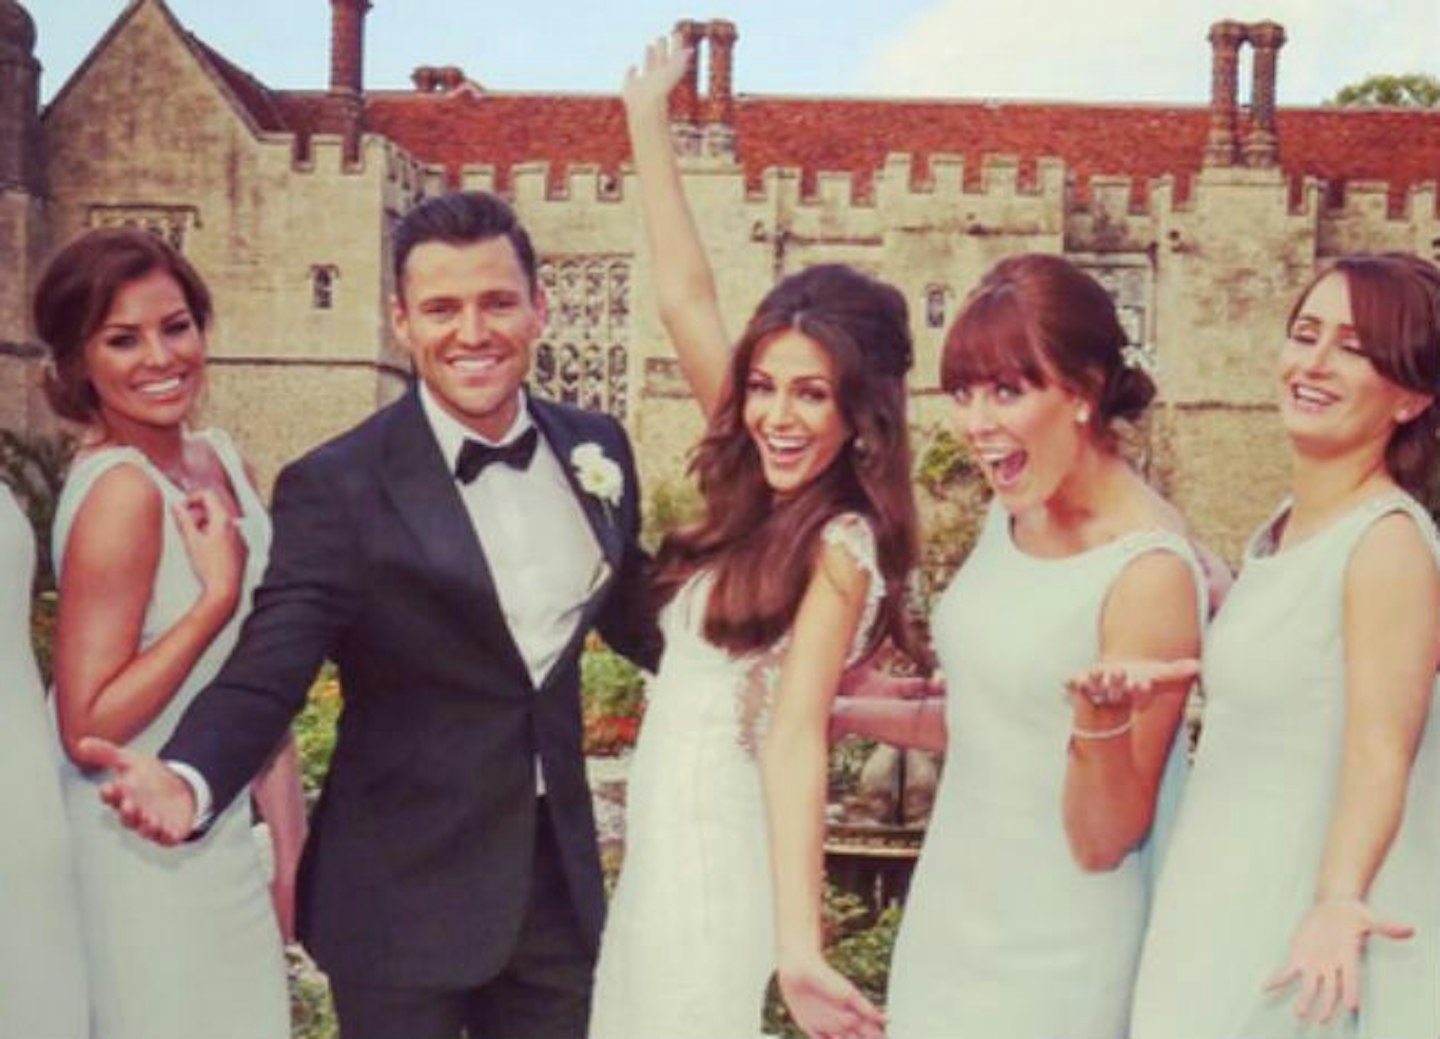 Jess was a bridesmaid for her brother Mark and Michelle